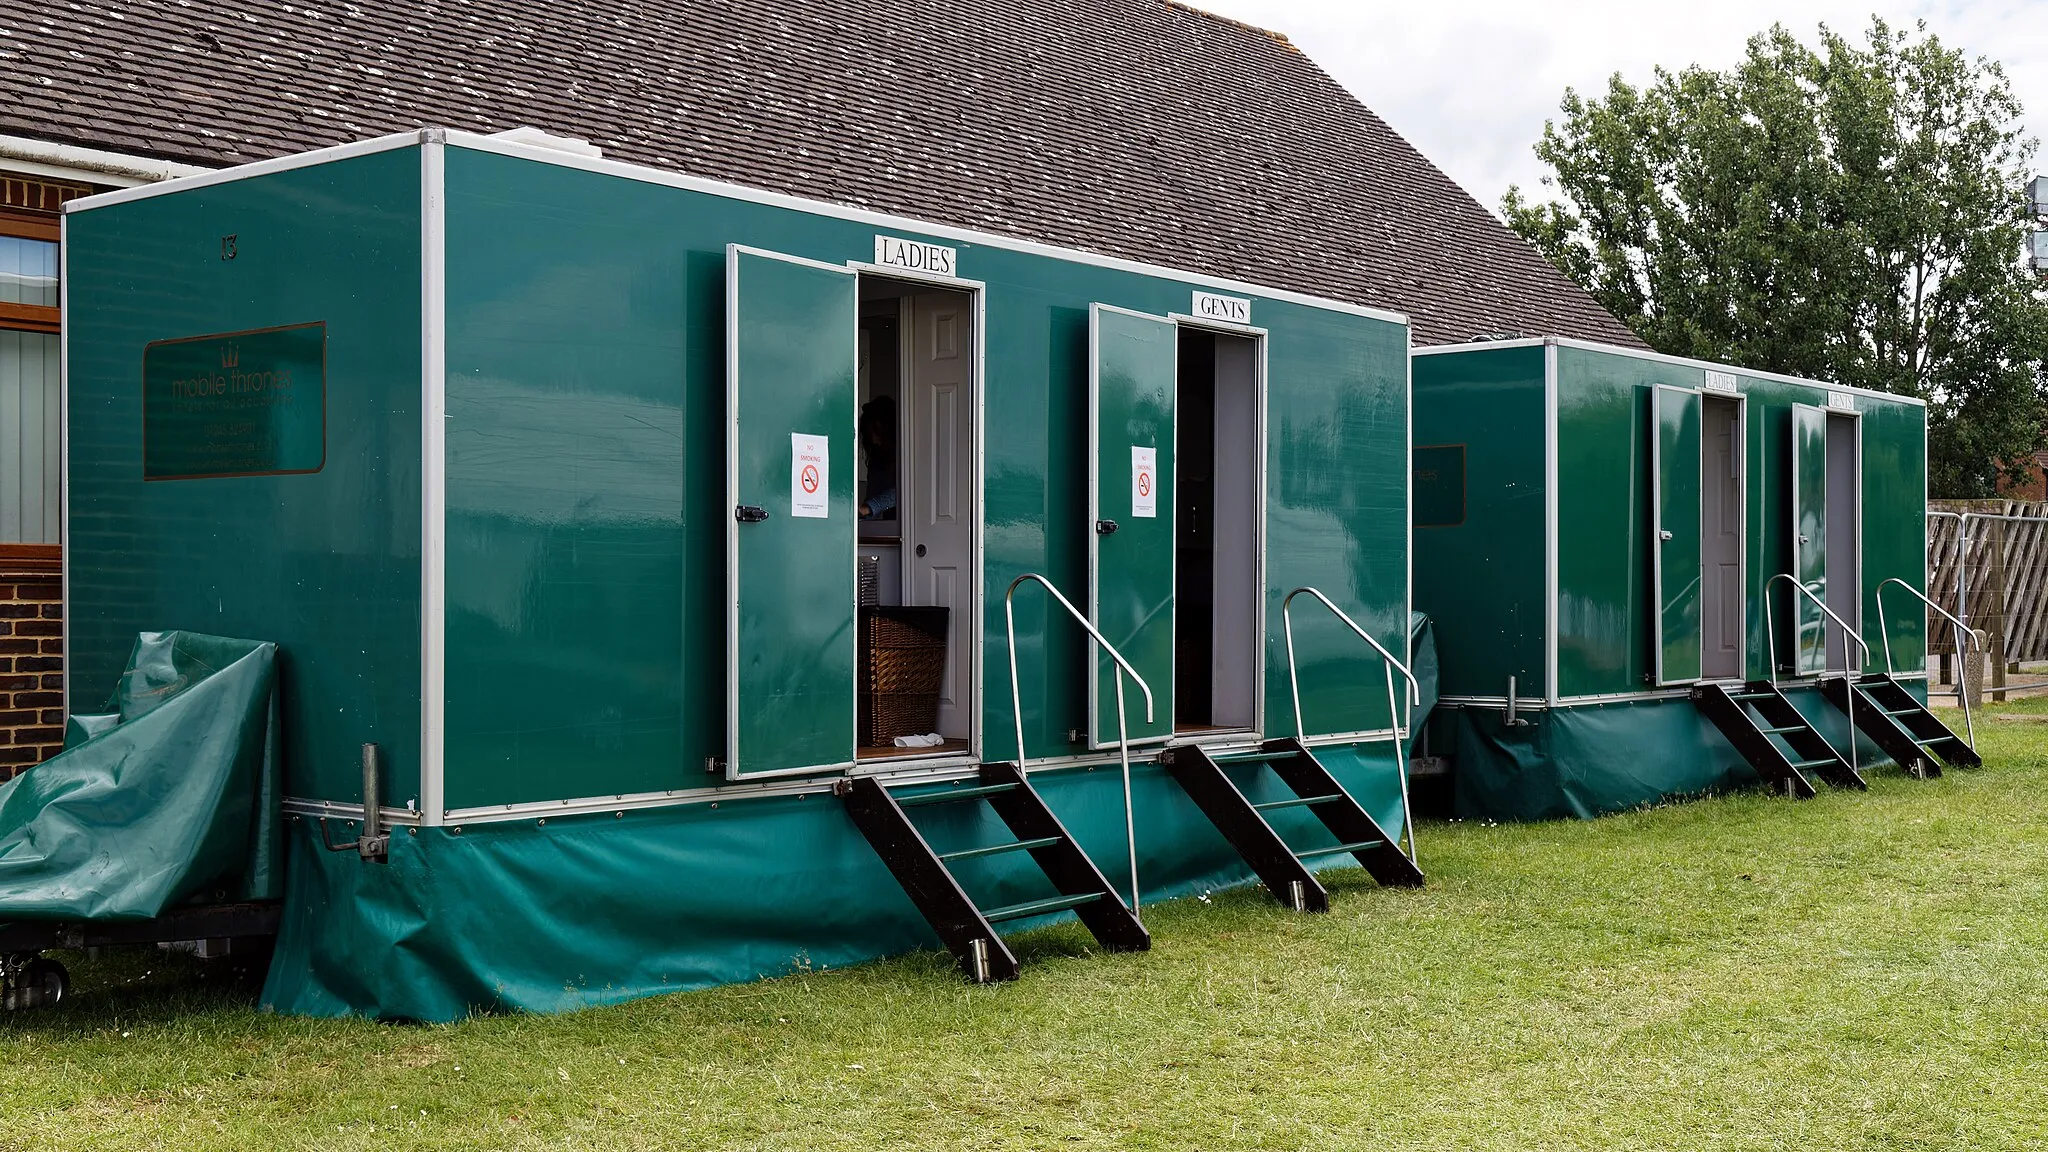 Photo showing: Lavatory toilet units at Abridge Village Weekend 2022 in Abridge, Essex, England. Mobile device view (2022): Wikimedia makes it difficult to immediately view photo groups related to this image. To see its most relevant allied photos, click on Abridge, and this uploader's photos. You can add a beta click-through 'categories' button to the very bottom of photo-pages you view by going to settings... three-bar icon top left. Desktop view (2022): Wikimedia makes it difficult to immediately view the helpful category links where you can find images related to this one in a variety of ways; for these go to the very bottom of the page. Camera: Canon EOS 6D Mark II with Canon EF 24-105mm F4L IS USM lens. Software: RAW file lens-corrected, optimized and converted with DxO PhotoLab 4 Elite, and further optimized with Adobe Photoshop CS2.